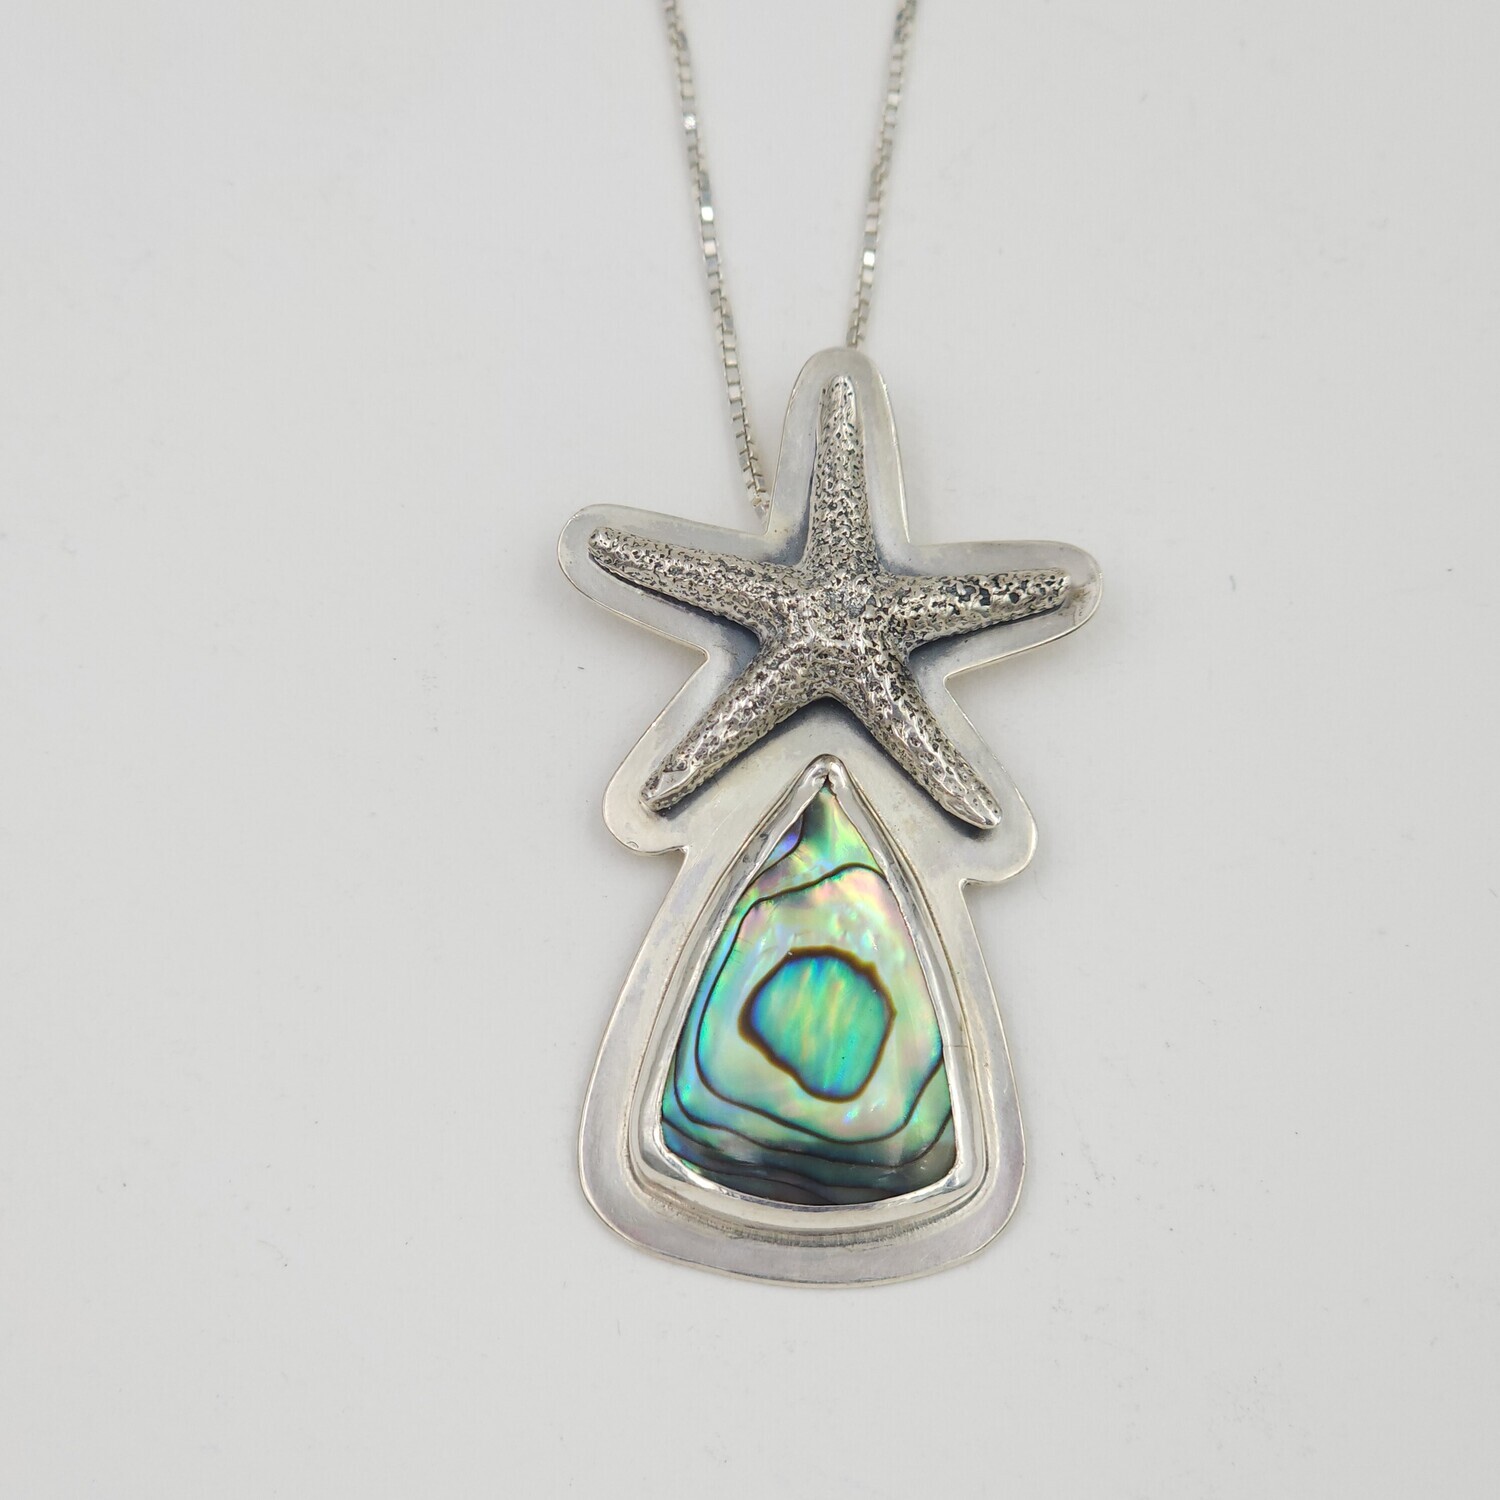 Bezel-set Abalone with Starfish Necklace in Sterling Silver